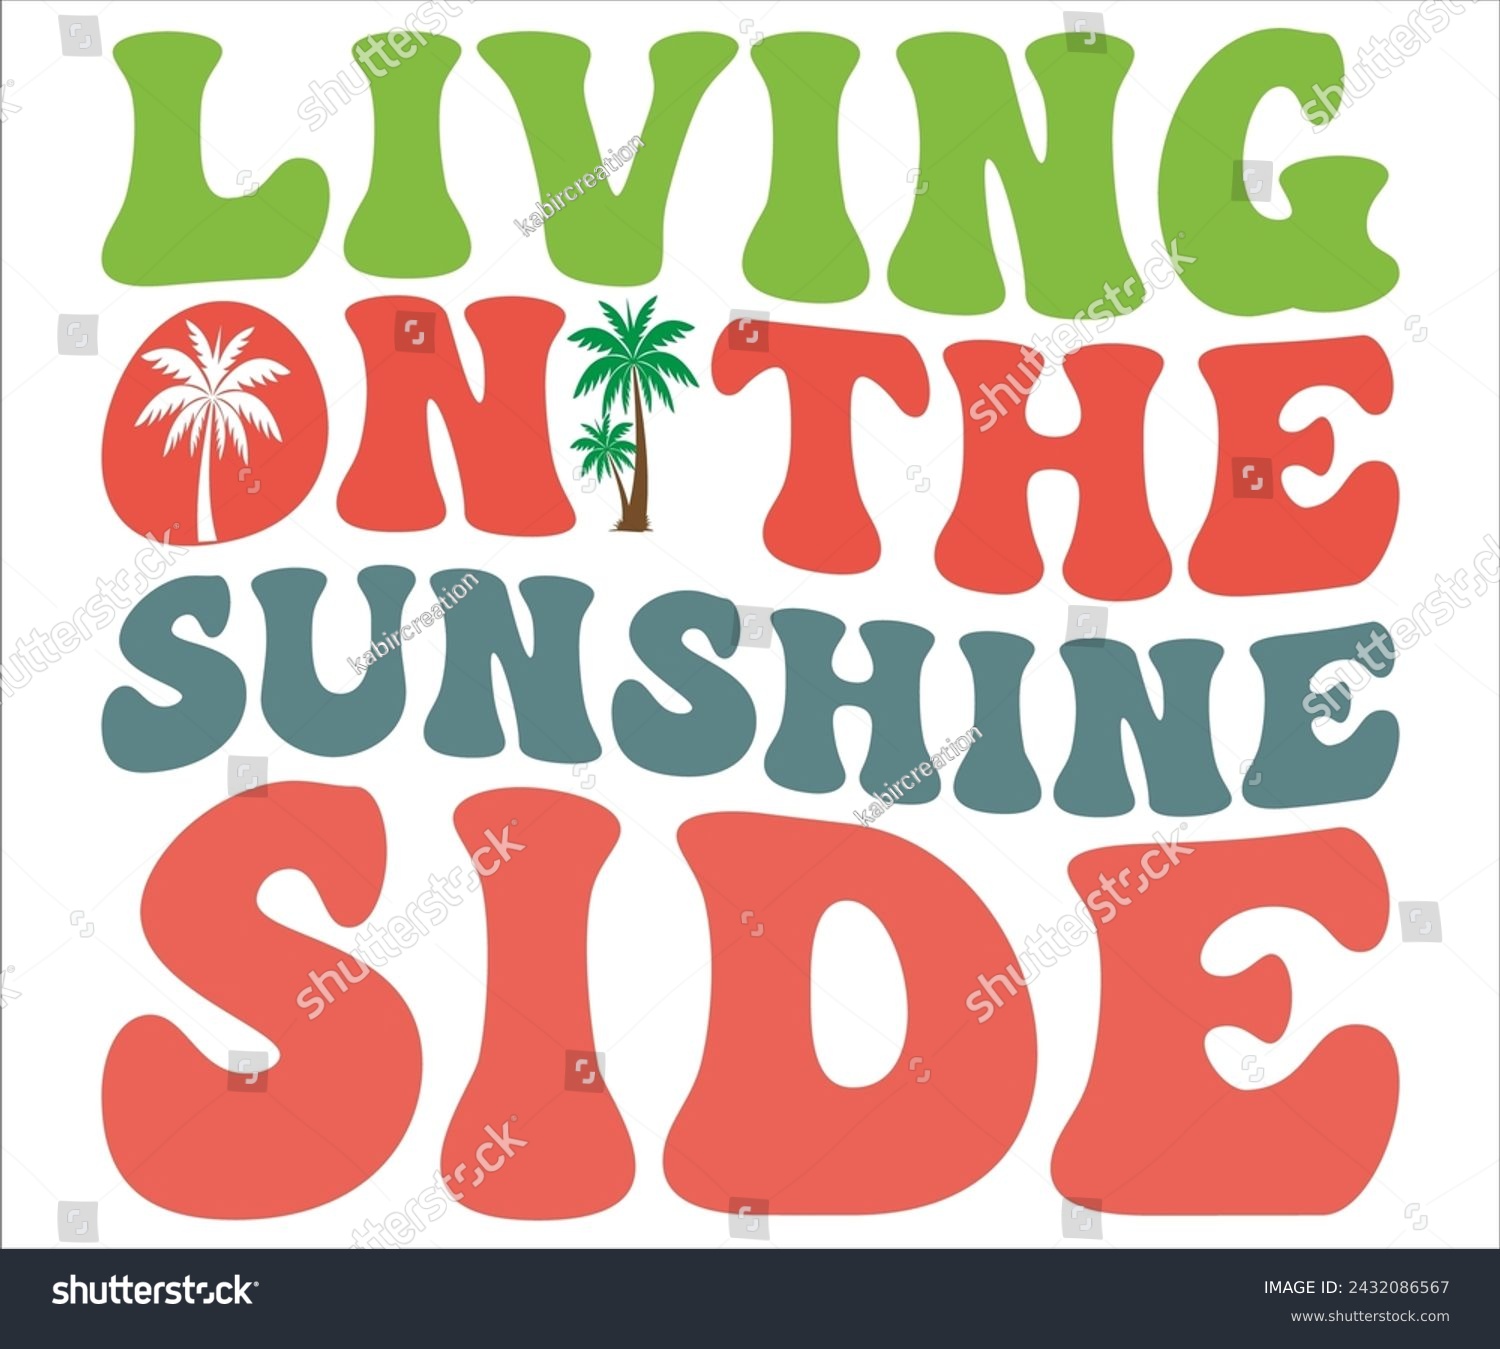 SVG of Living On The Sunshine Side T-shirt, Happy Summer Day T-shirt, Happy Summer Day Retro svg,Hello Summer Retro Svg,summer Beach Vibes Shirt, Vacation, Cut File for Cricut svg